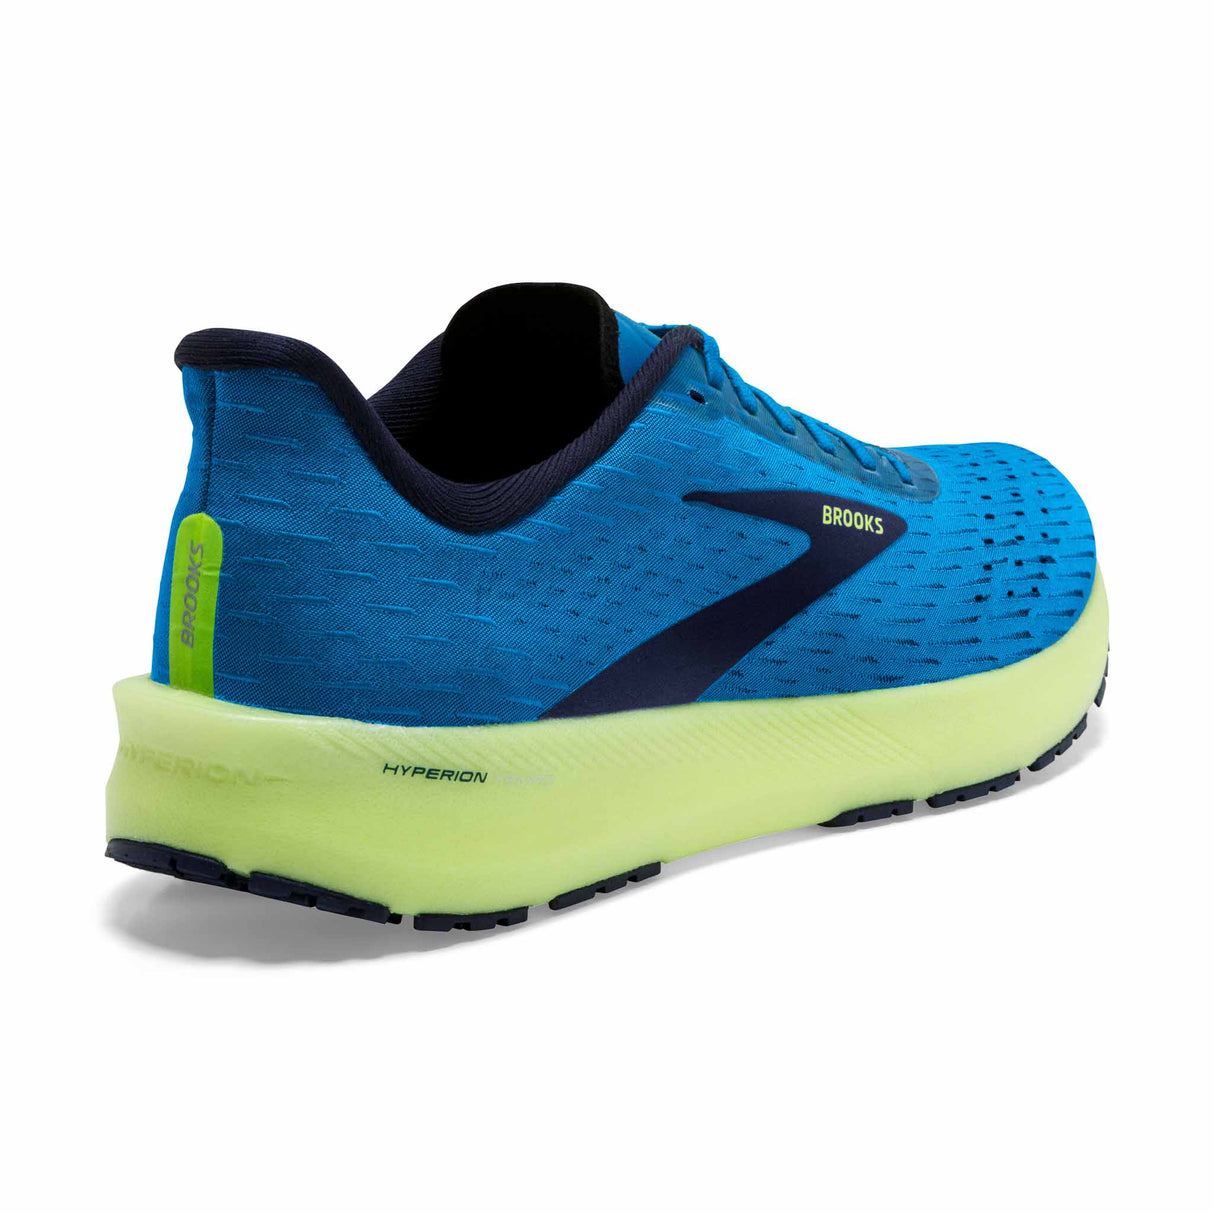 Brooks Hyperion Tempo chaussures de course à pied homme - Blue / Nightlife / Peacoat - angle 2